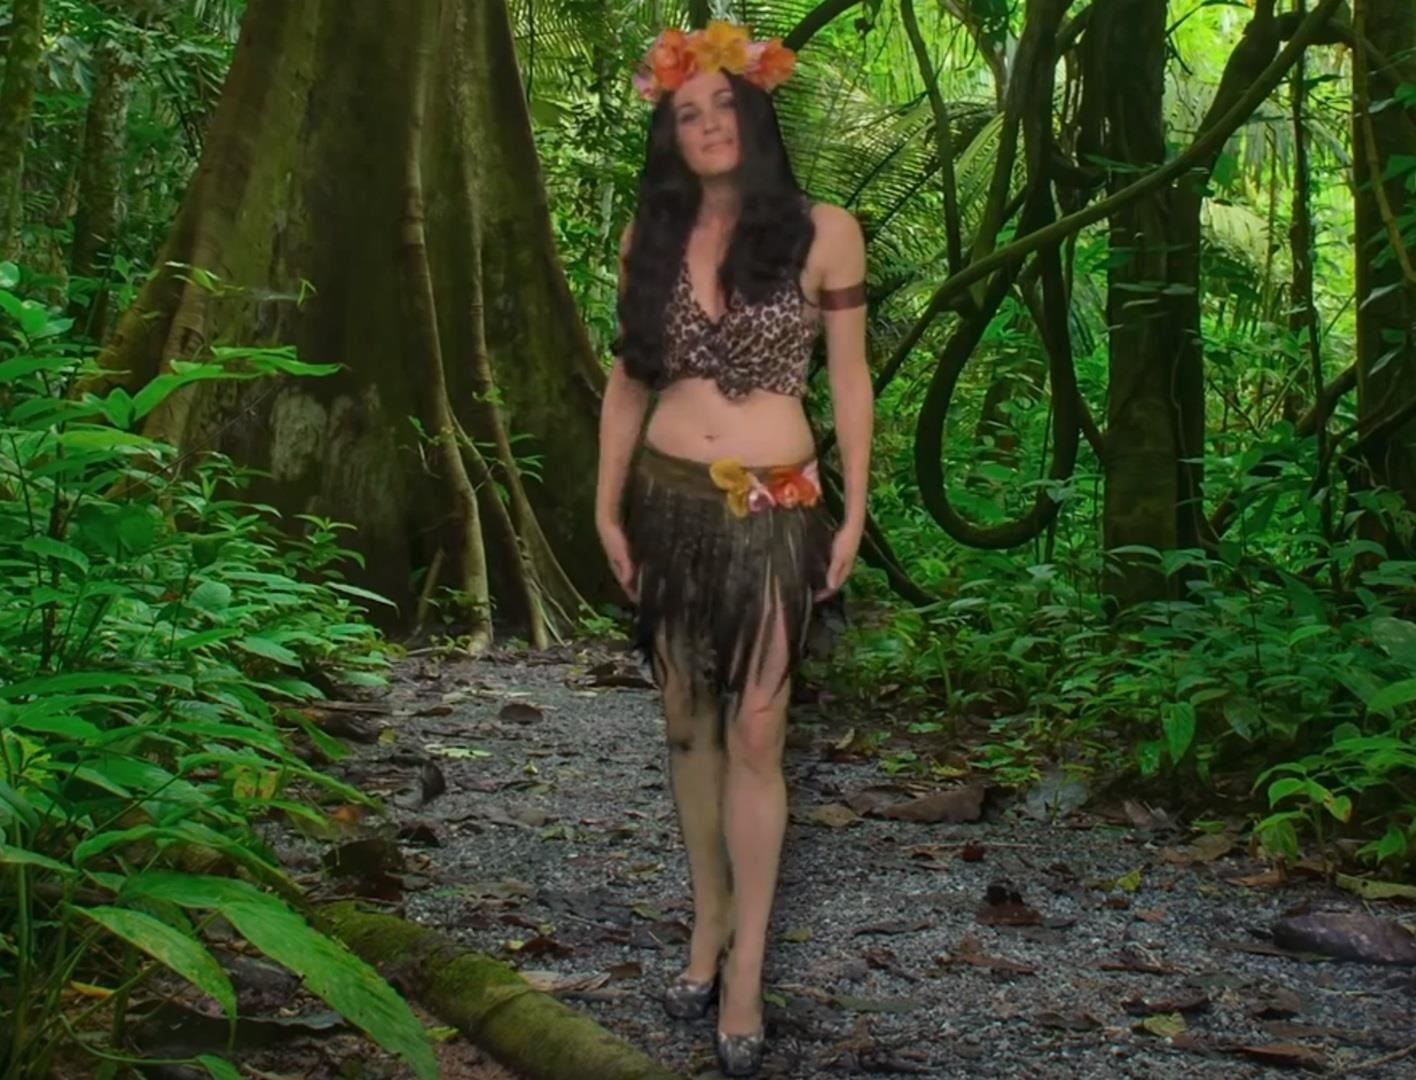 How to Make a Katy Perry "Roar" Costume for Halloween